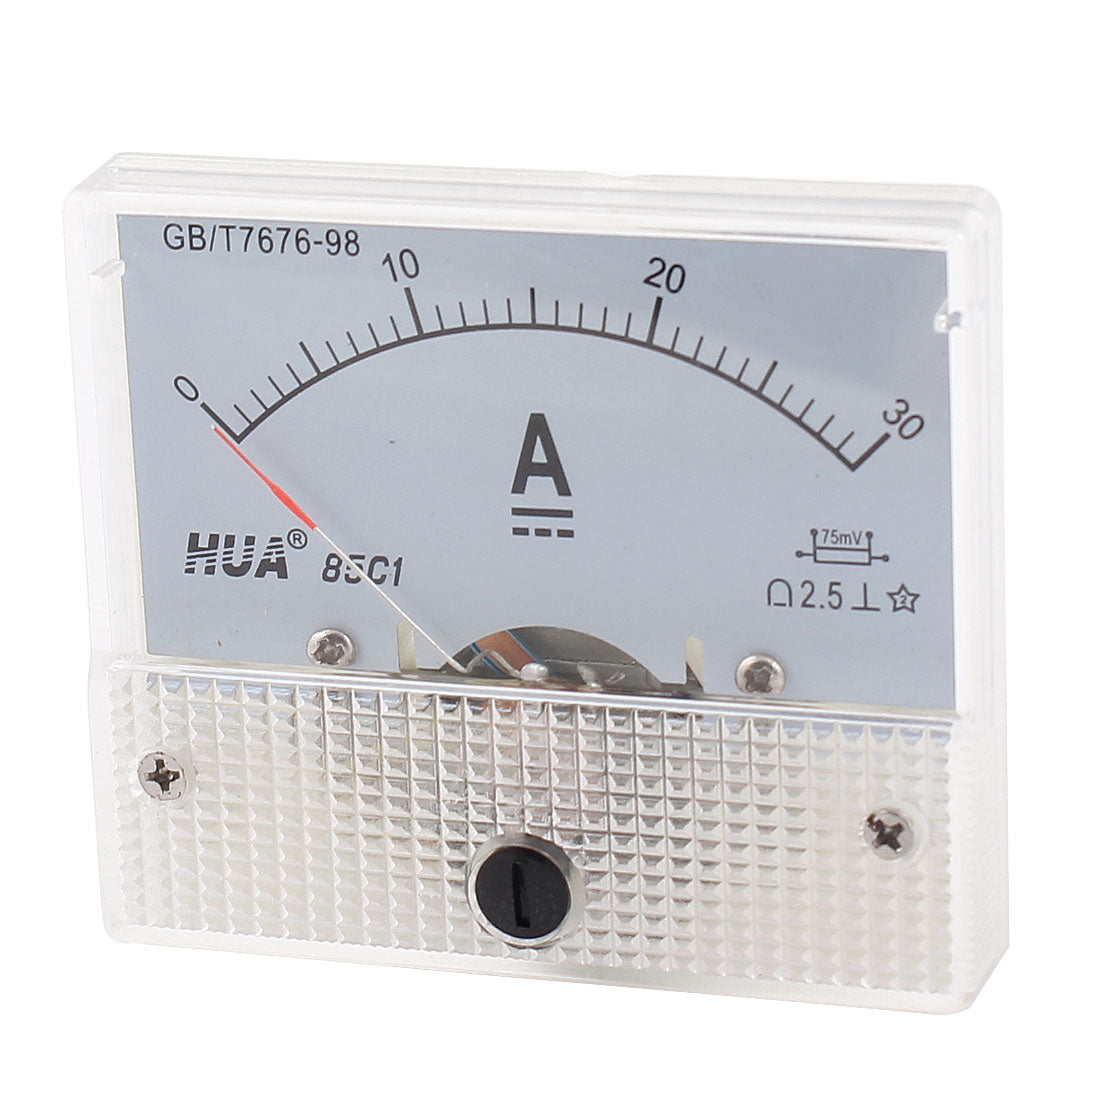 uxcell Uxcell 85C1 DC 0-30A Analog Ammeter Analogue Panel Ampmeter Current Meter Gauge White